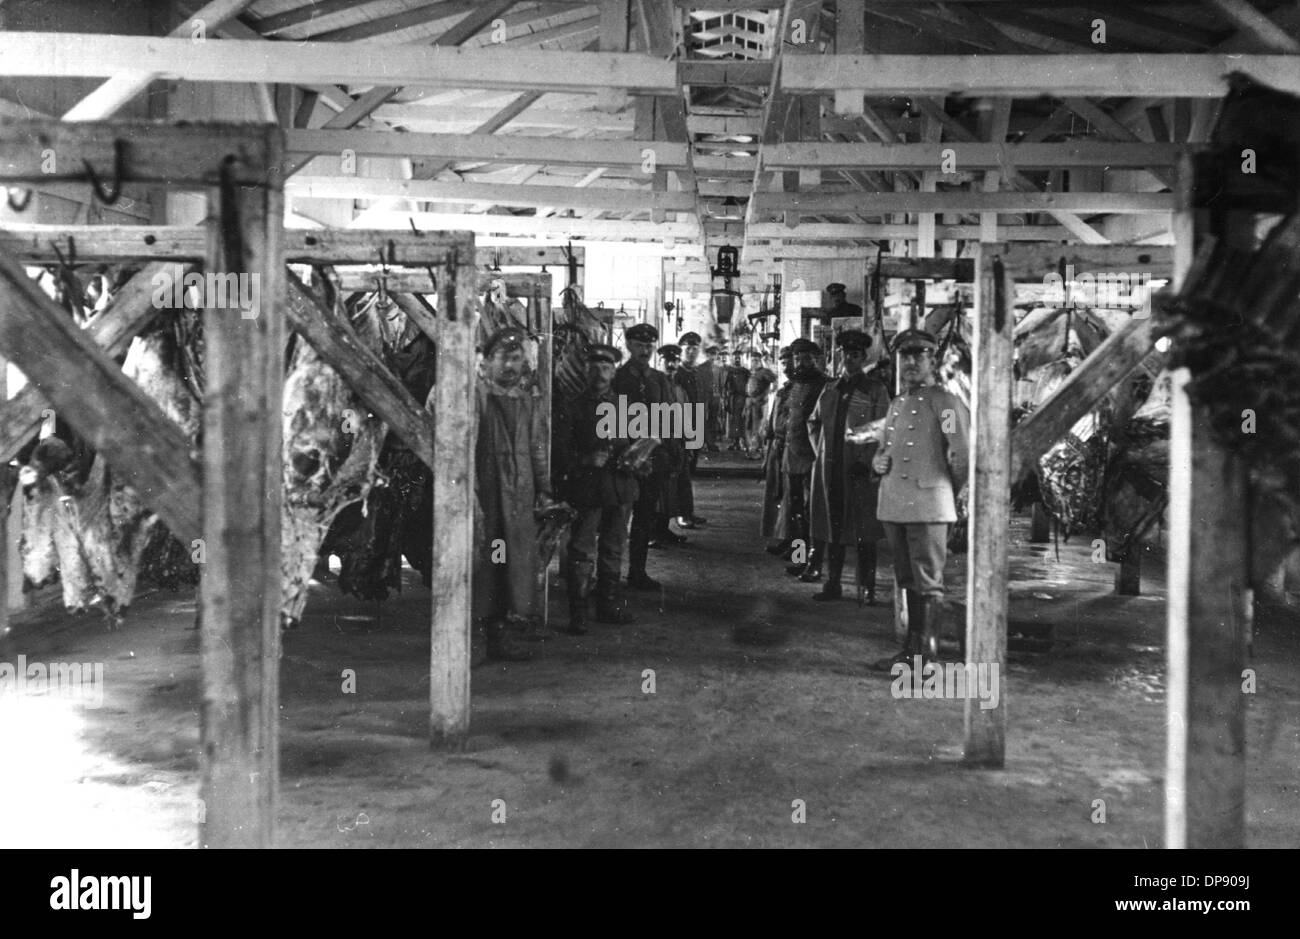 Supply of the troops with food: view into a slaughterhouse in Russia. The deadly shots by Serbian nationalists on the Austrian heir to the throne Franz Ferdinand on the 28th of June in 1914 in Sarajevo caused the outbreak of the Great War, later to be called World War I, in August 1914. The Central Powers, namely Germany, Austria-Hungary and as well later the Ottoman Empire (Turkey) and Bulgaria against the Triple Entente, consisting of Great Britain, France and Russia, as well as numerous allies. The sad result of World War I, which ended with the defeat of the Central Powers: round 8.5 mill Stock Photo